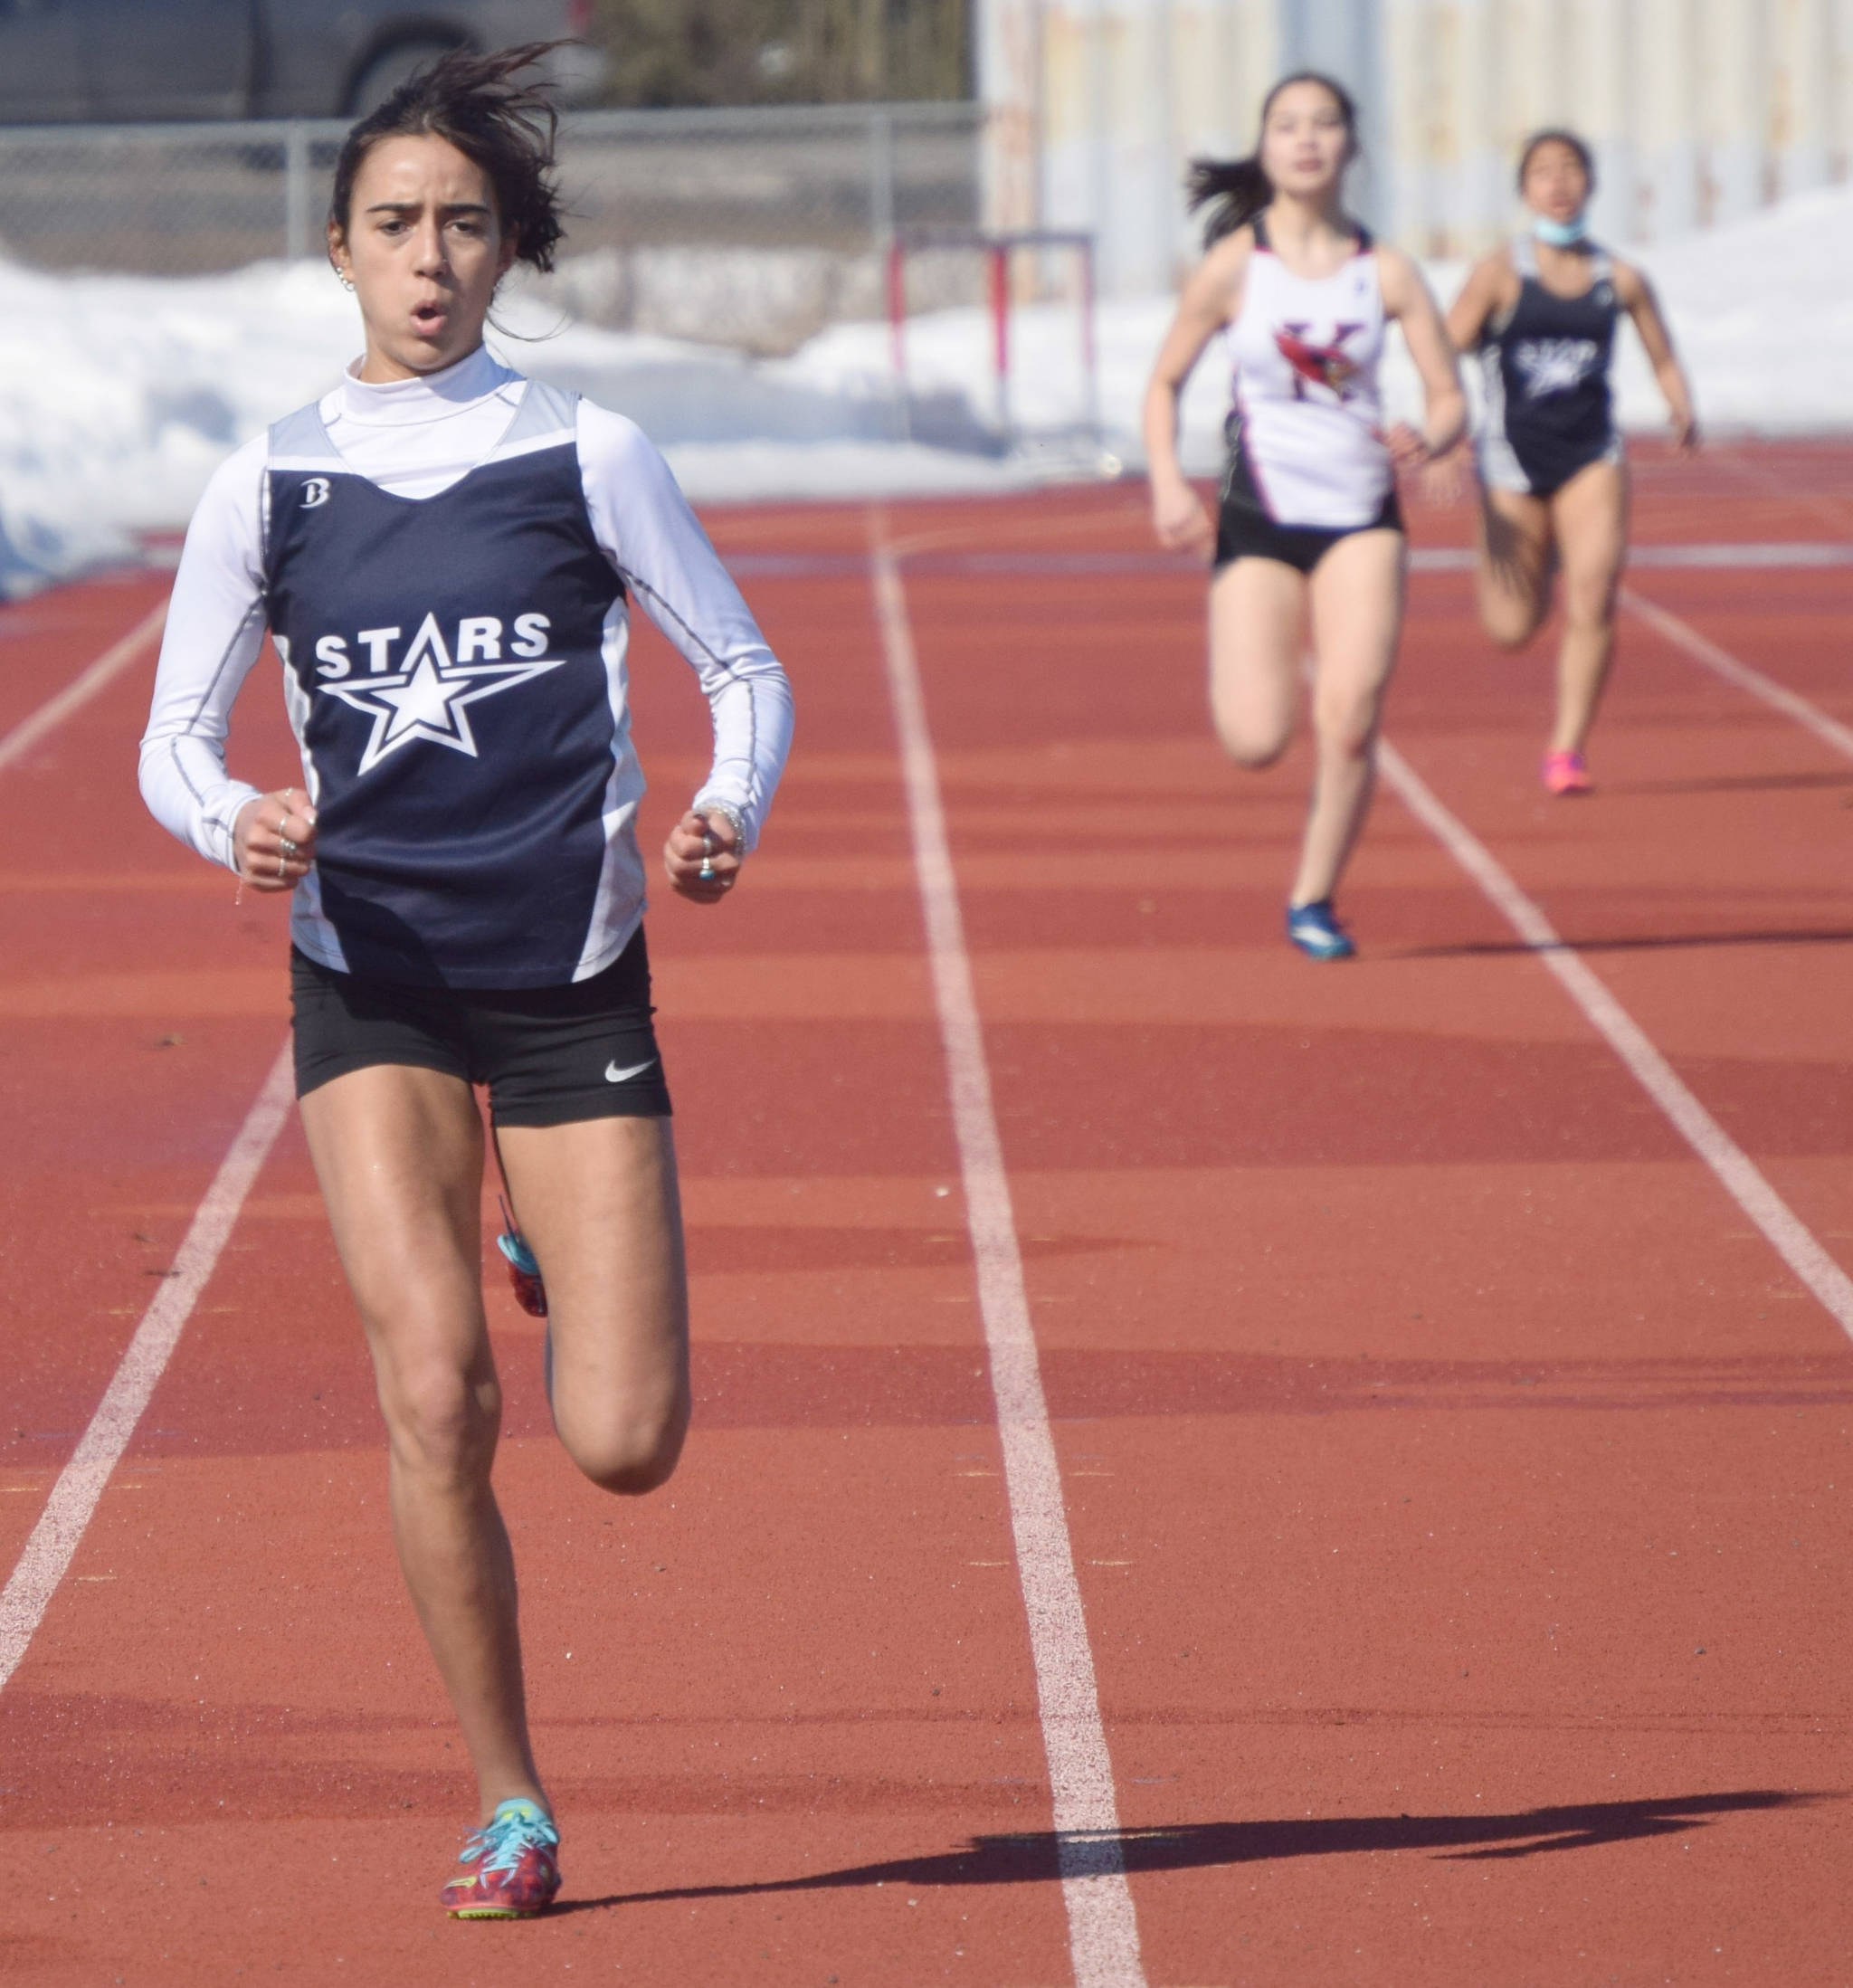 Soldotna’s Drysta Crosby-Schneider runs to victory in 400 meters in a dual meet with Kenai Central on Friday, April 16, 2021, at Kenai Central High School in Kenai, Alaska. (Photo by Jeff Helminiak/Peninsula Clarion)